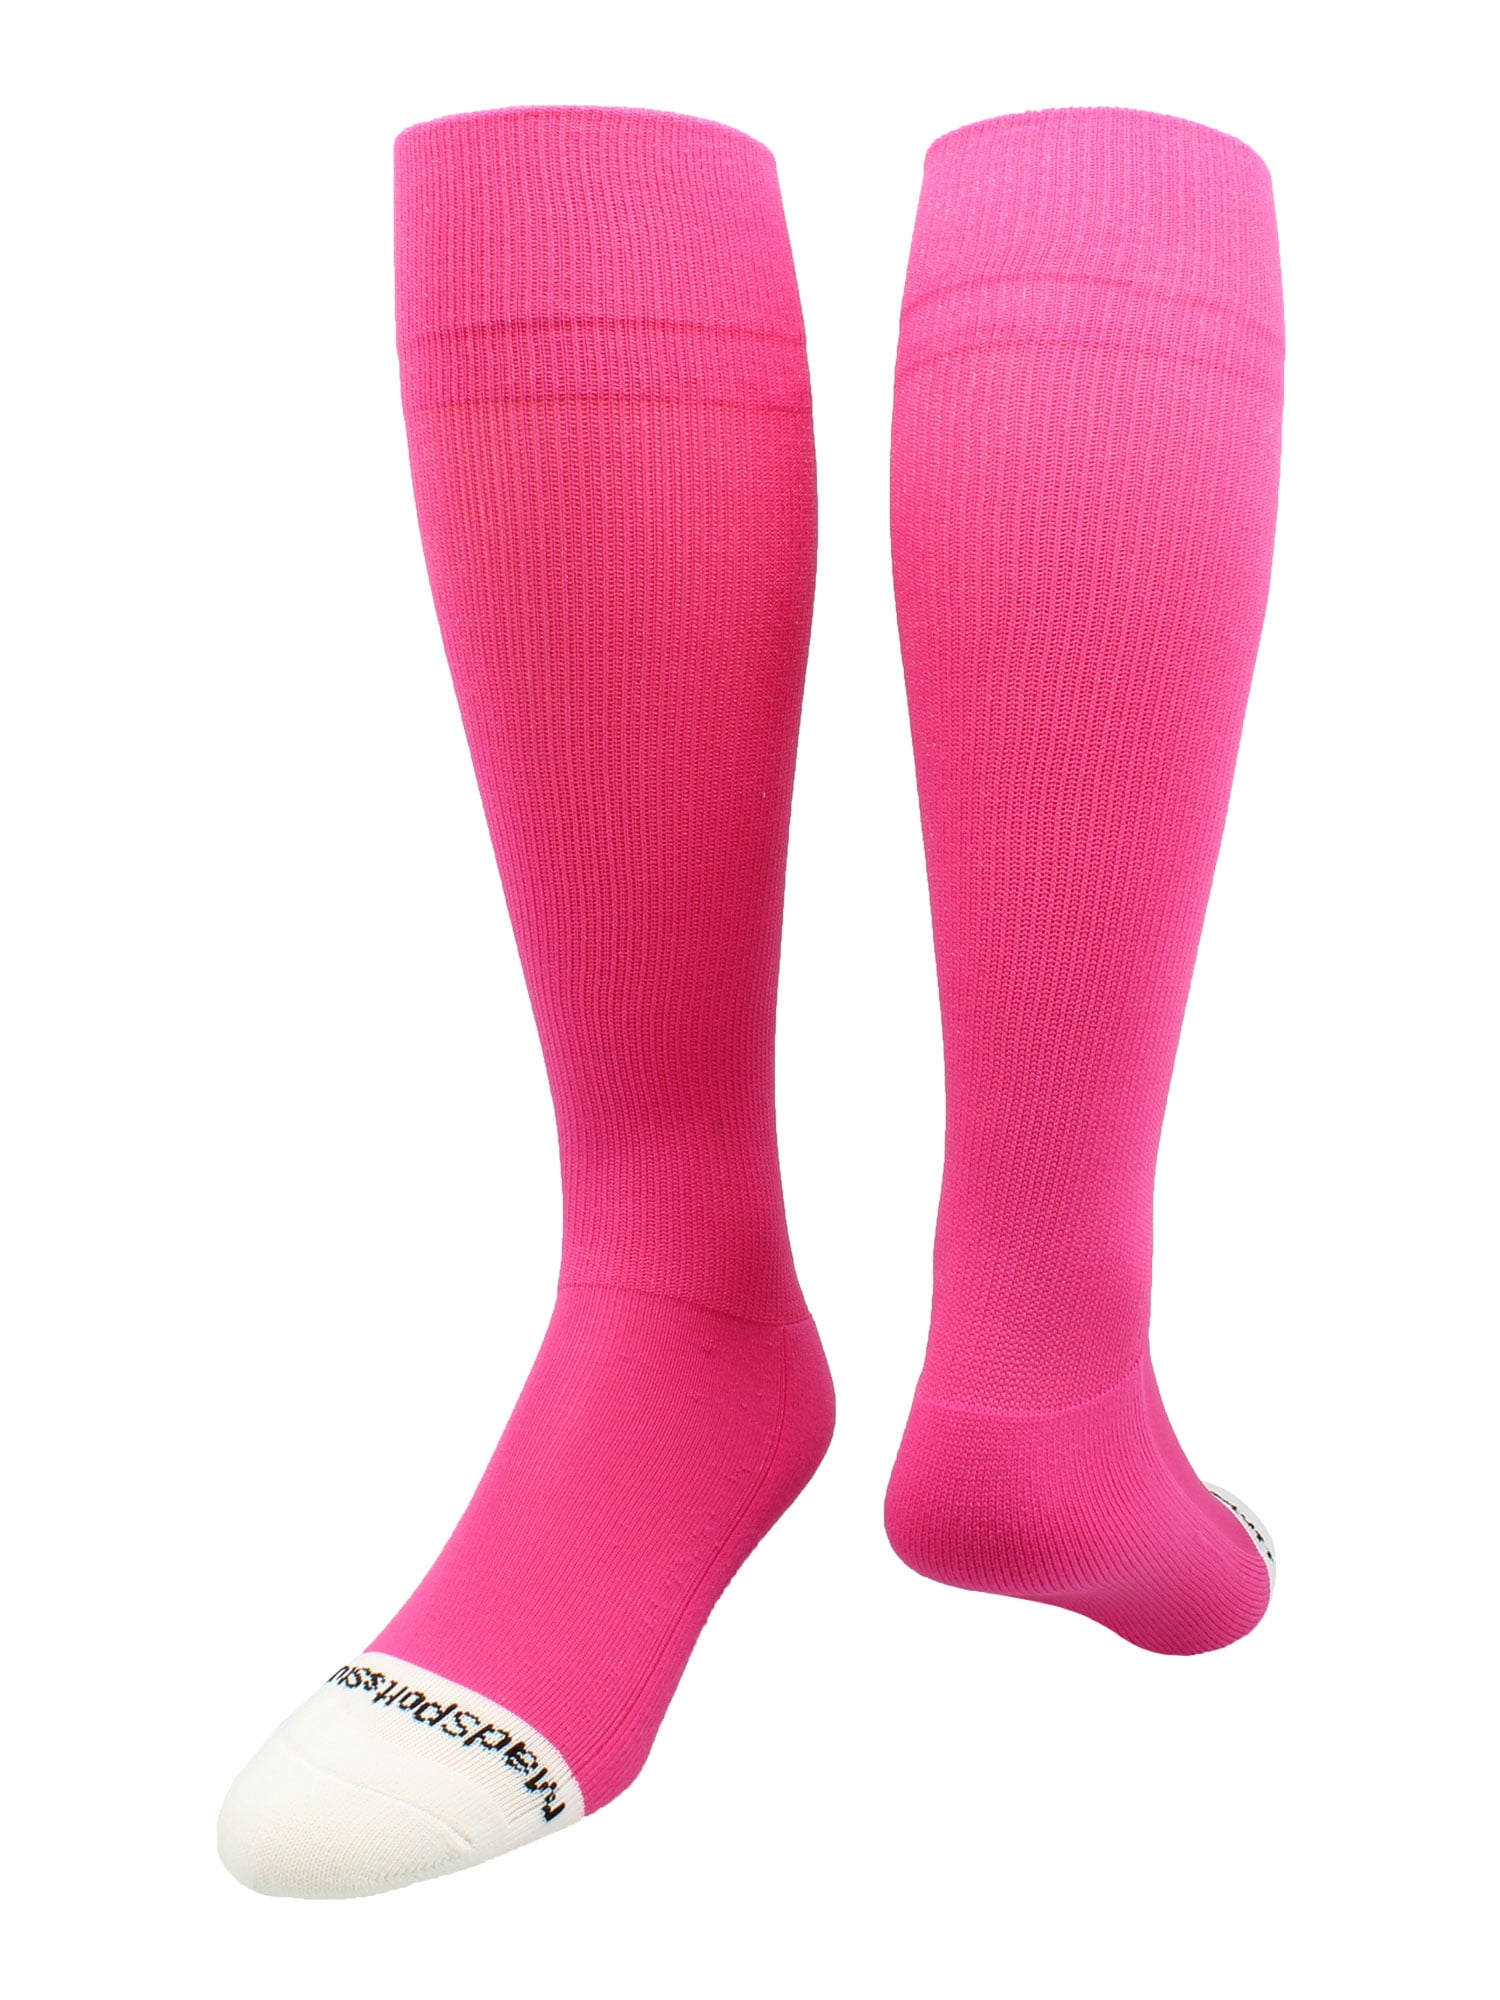 Large, Pink//White Rugby Imports Performance Rugby Socks Hoops